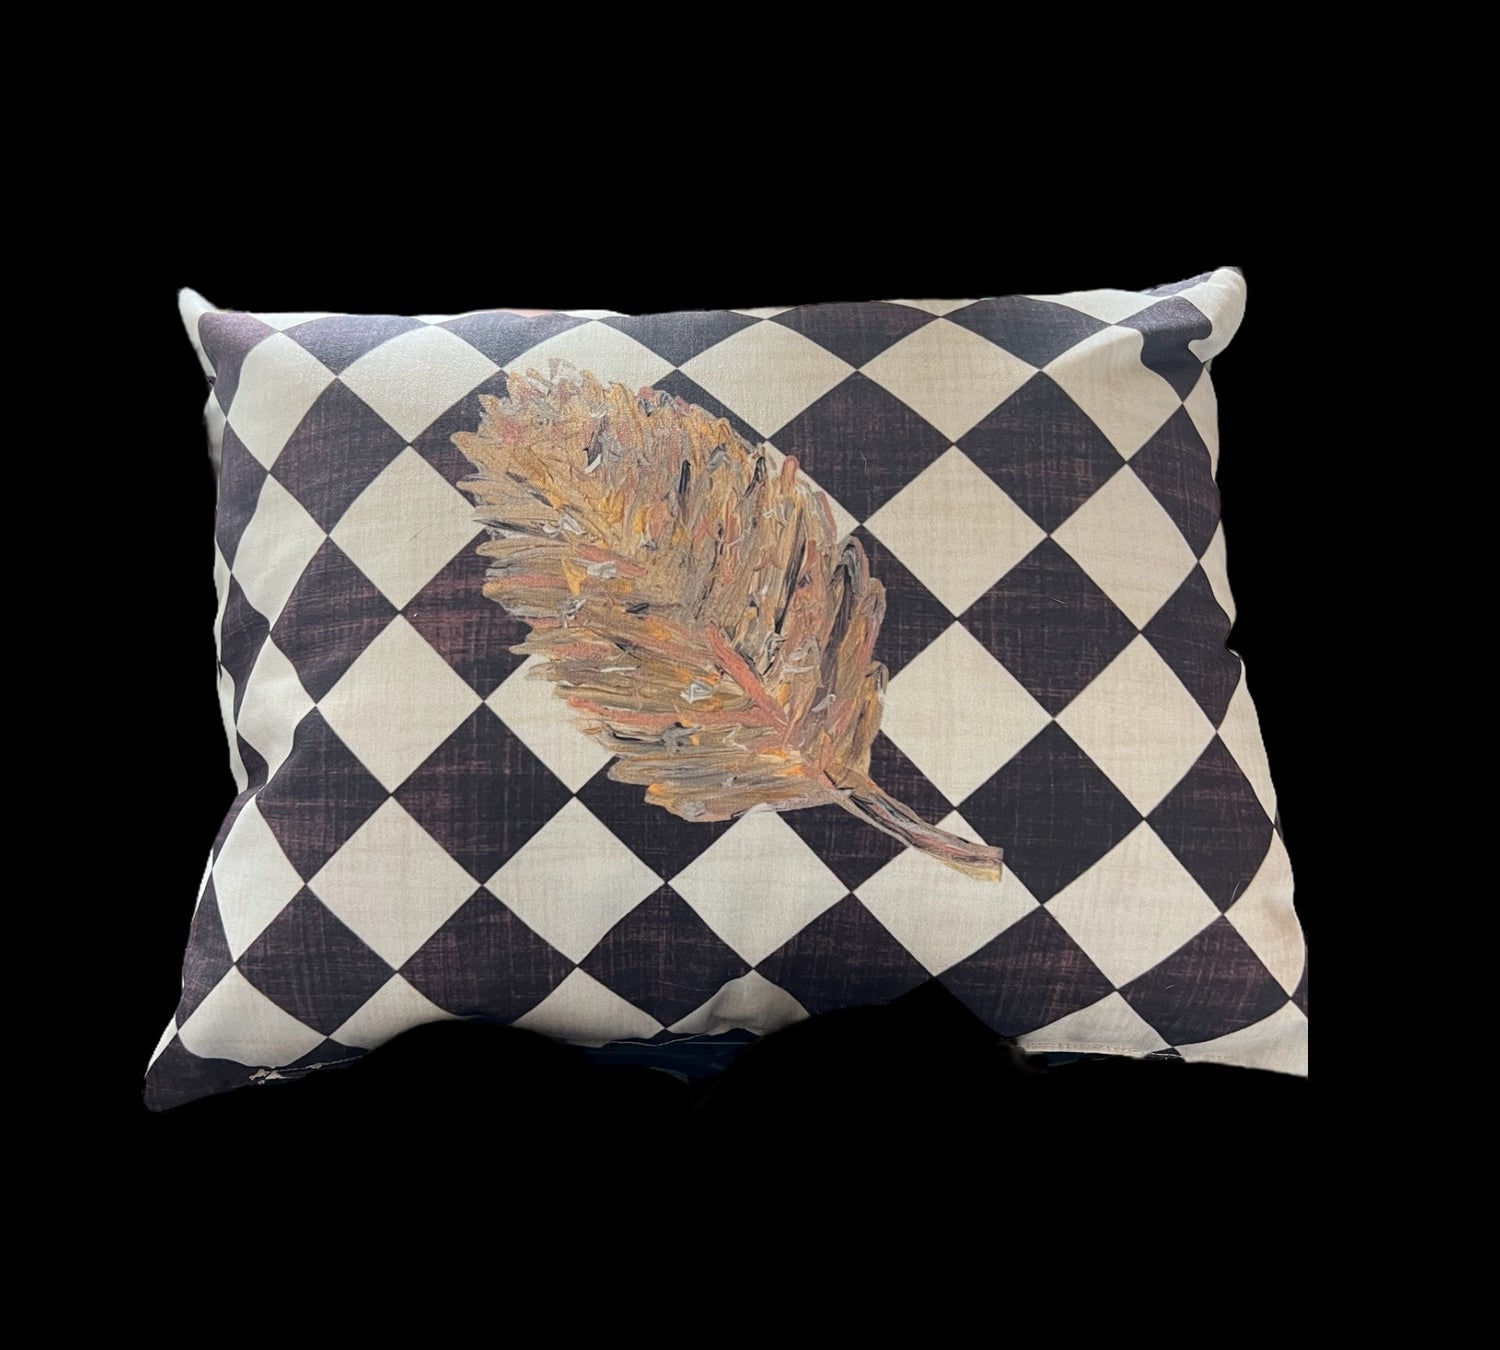 The Golden Leaf Diamond/Checkered Accent Pillow